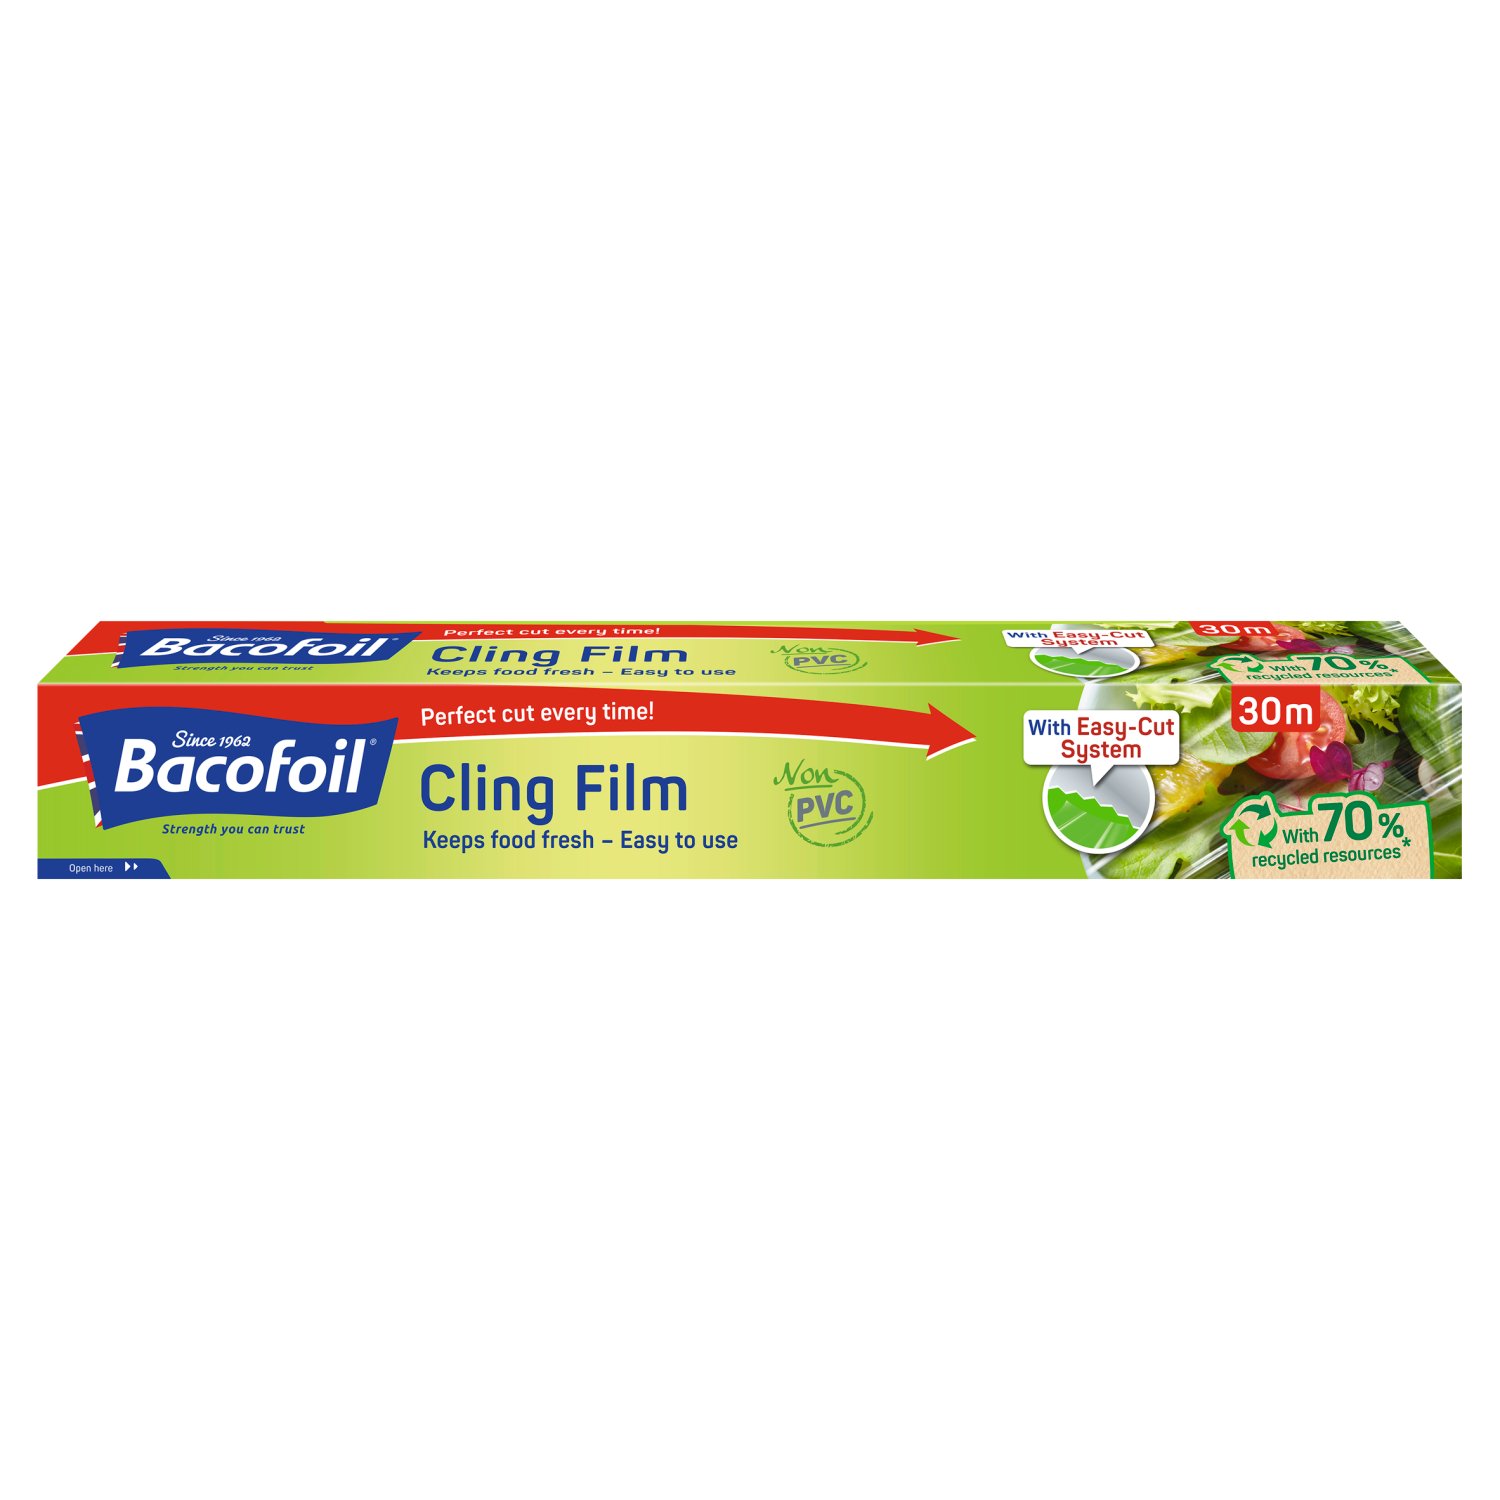 Bacofoil Pve Free Cling Film (1 Piece)